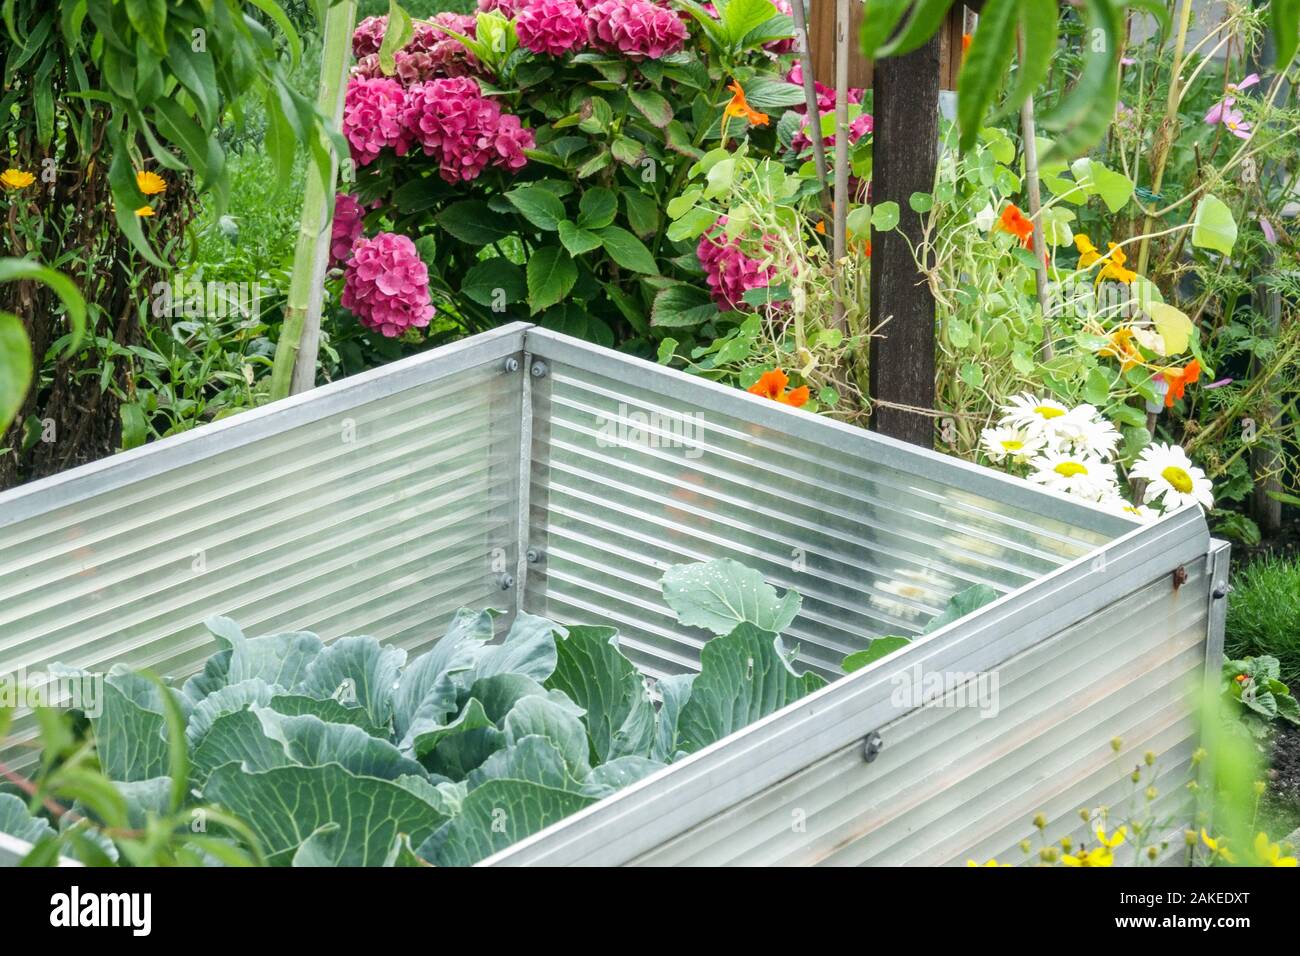 Hotbed in late summer, cabbage, flowers Vegetable plot cold frame in garden growing vegetables Stock Photo